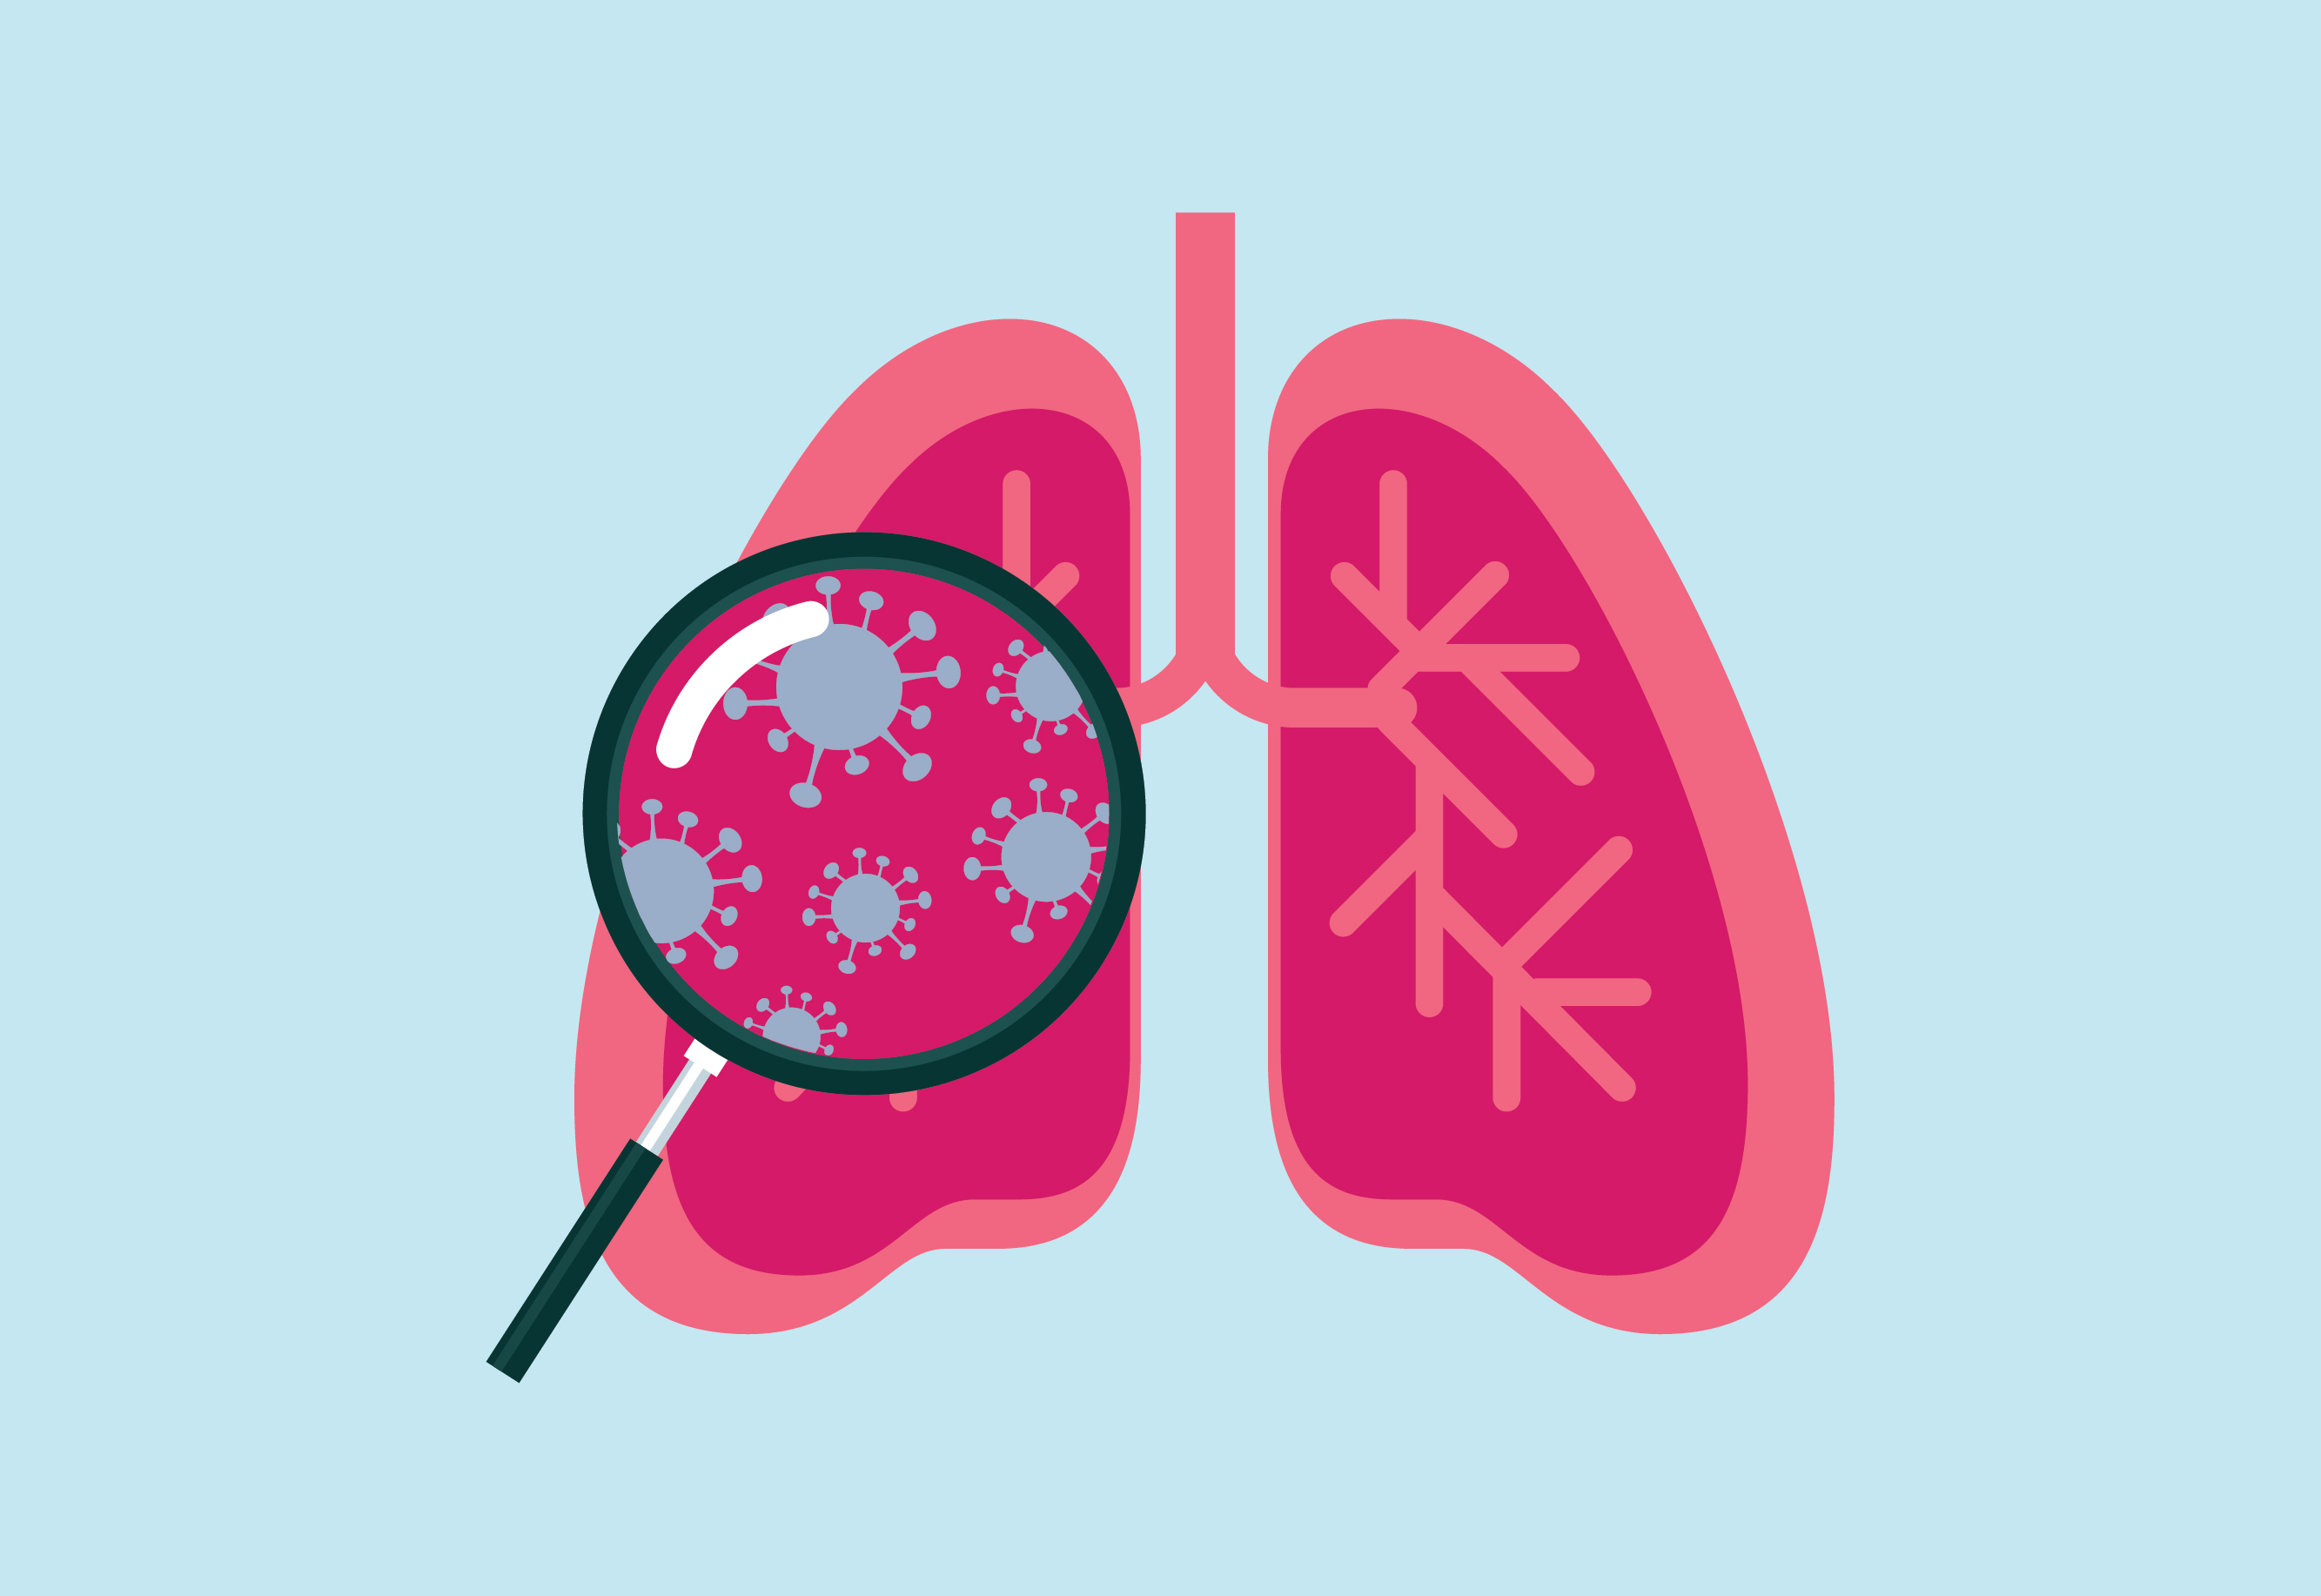 Icon of magnifying glass showing an enlarged view of a lung